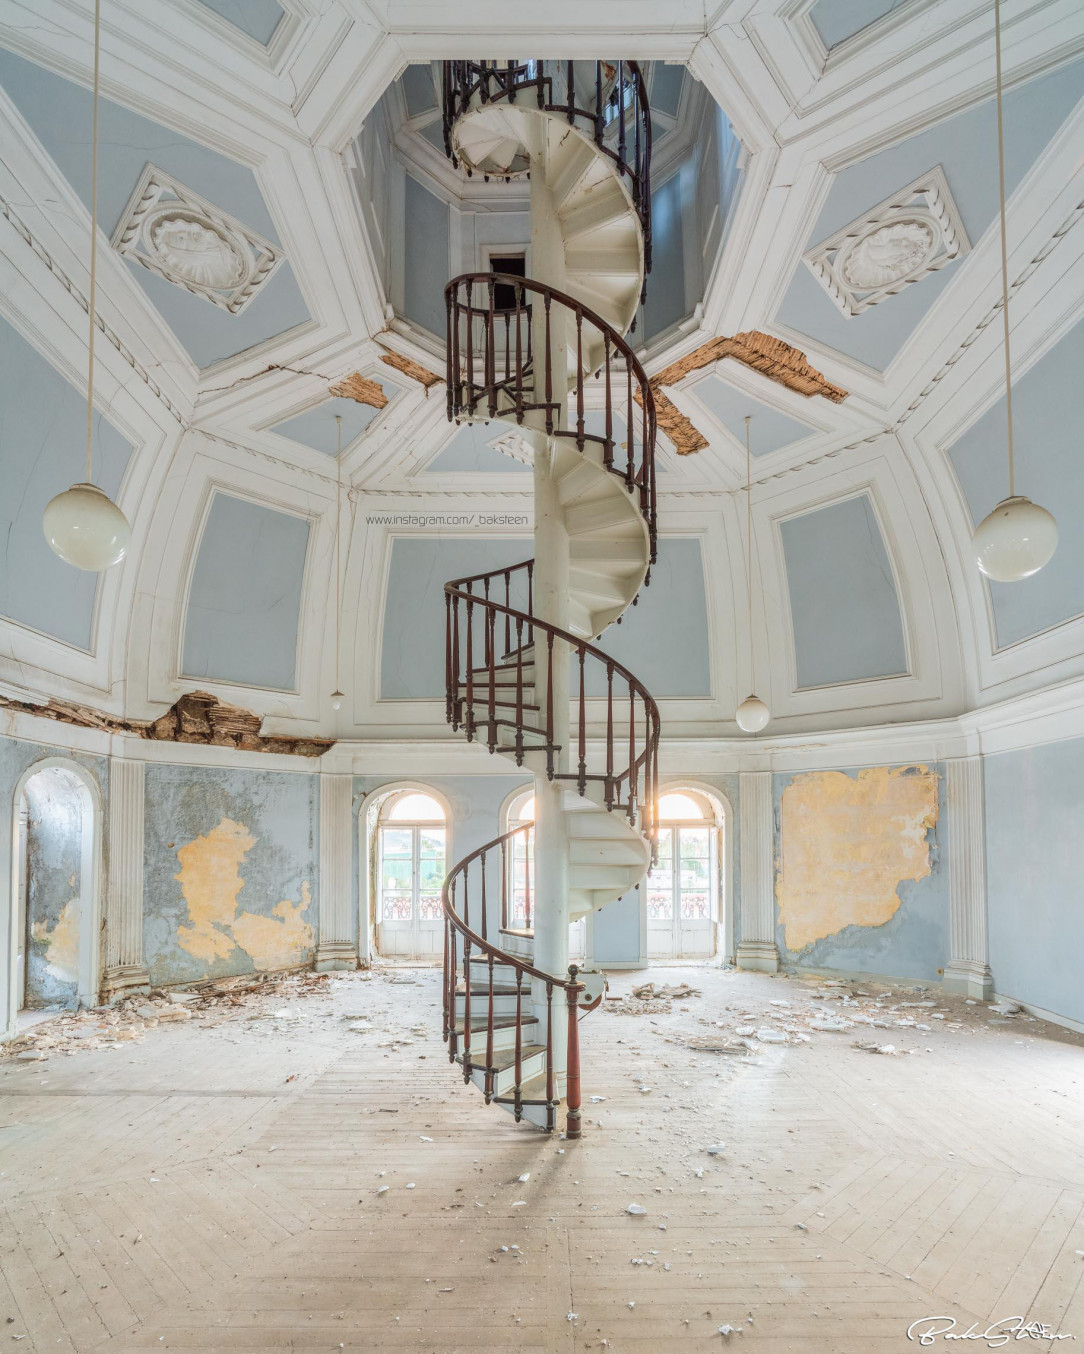 Spiral staircase to the attic of an abandoned school